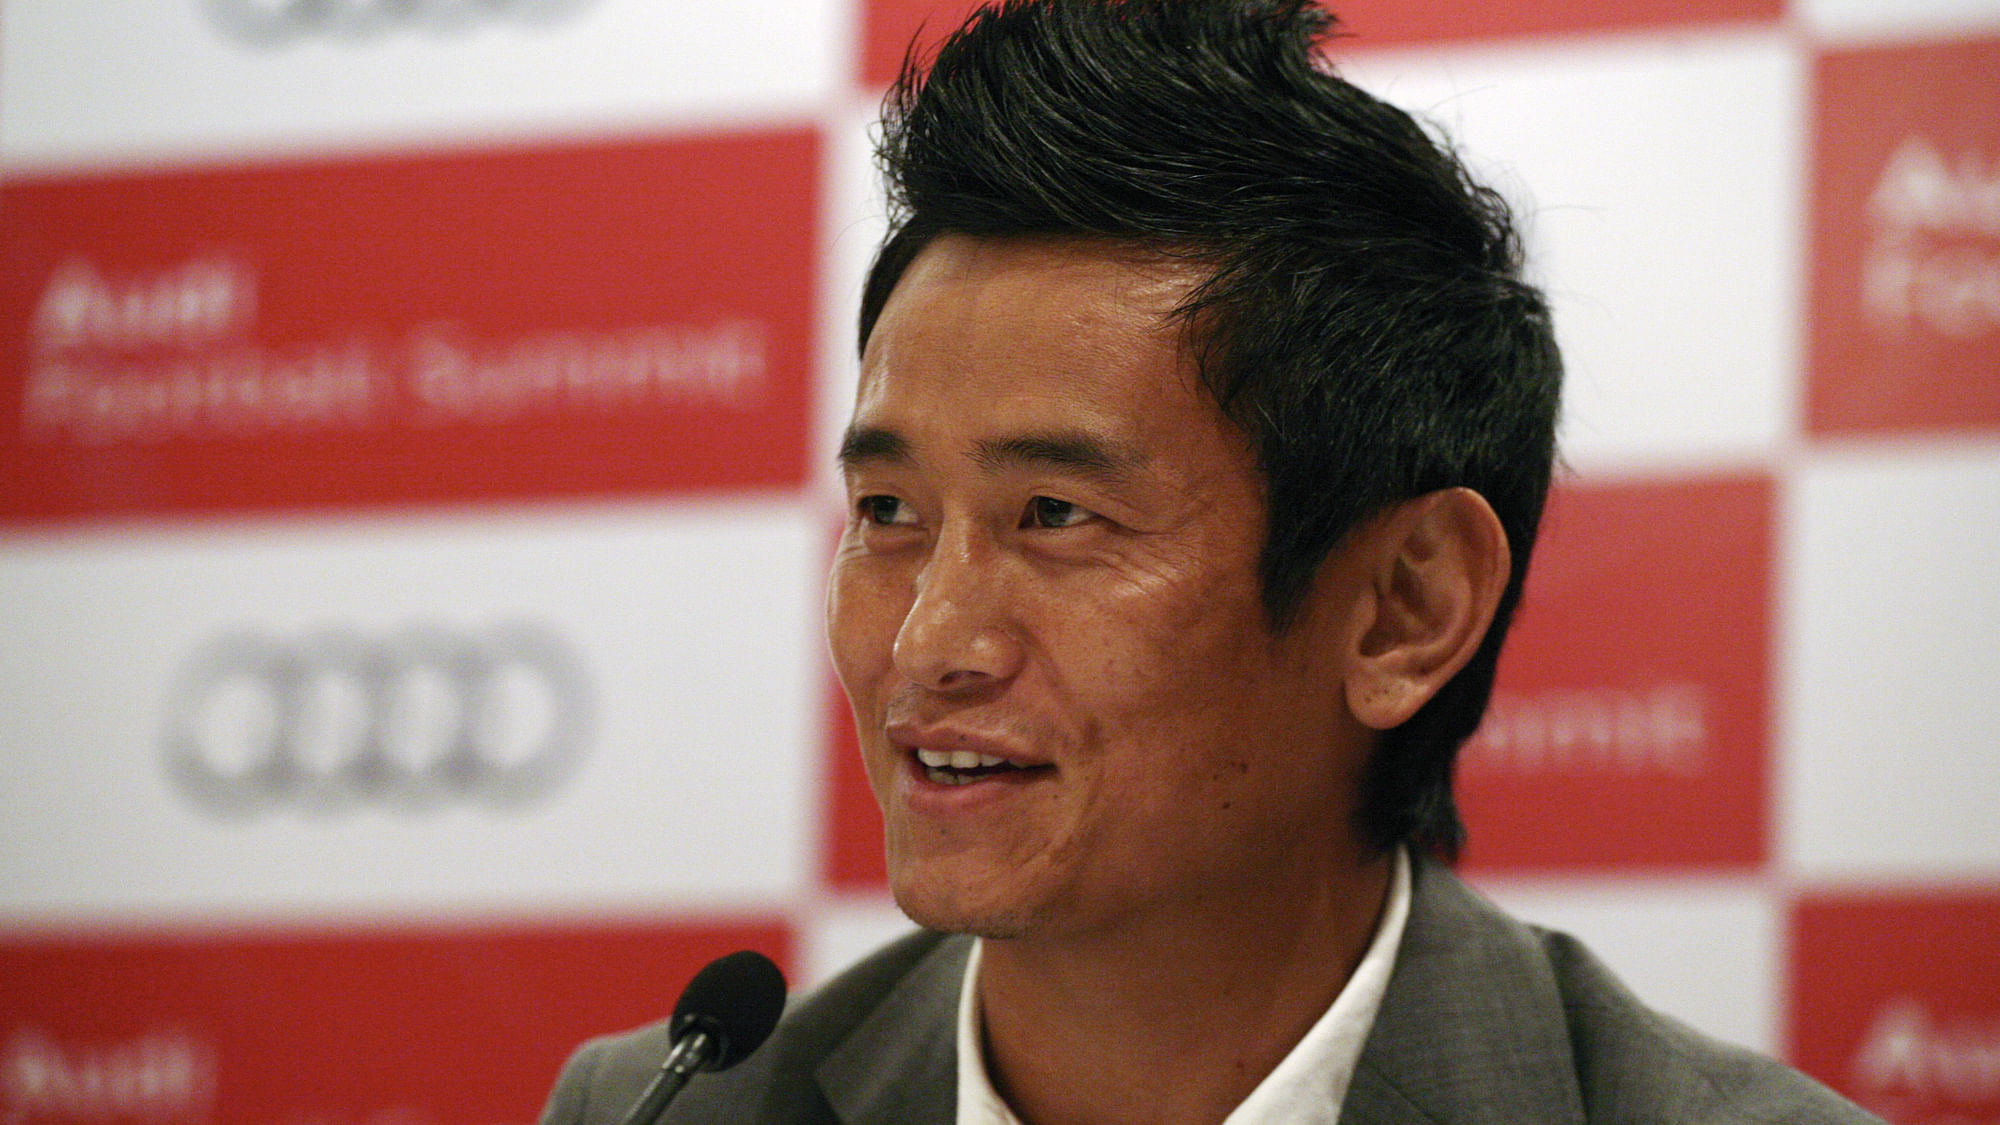 Bhaichung is the first Indian player to play 100 international matches before current national team skipper Sunil Chhetri surpassed him.